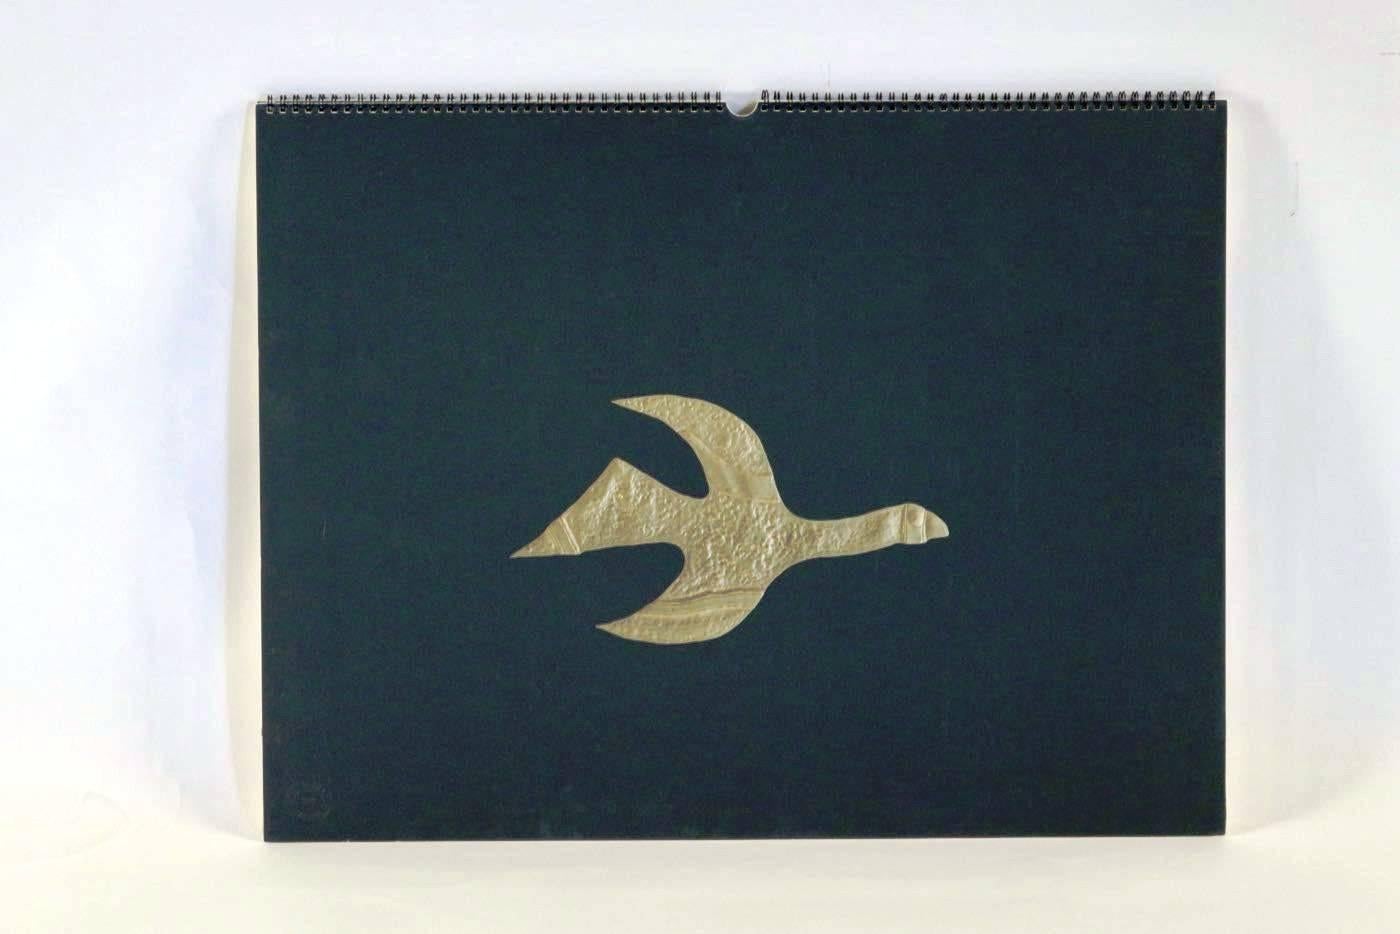 12 Lithographs of Jewelry by Georges Braque, compiled as a calendar, 1979, Rare 1